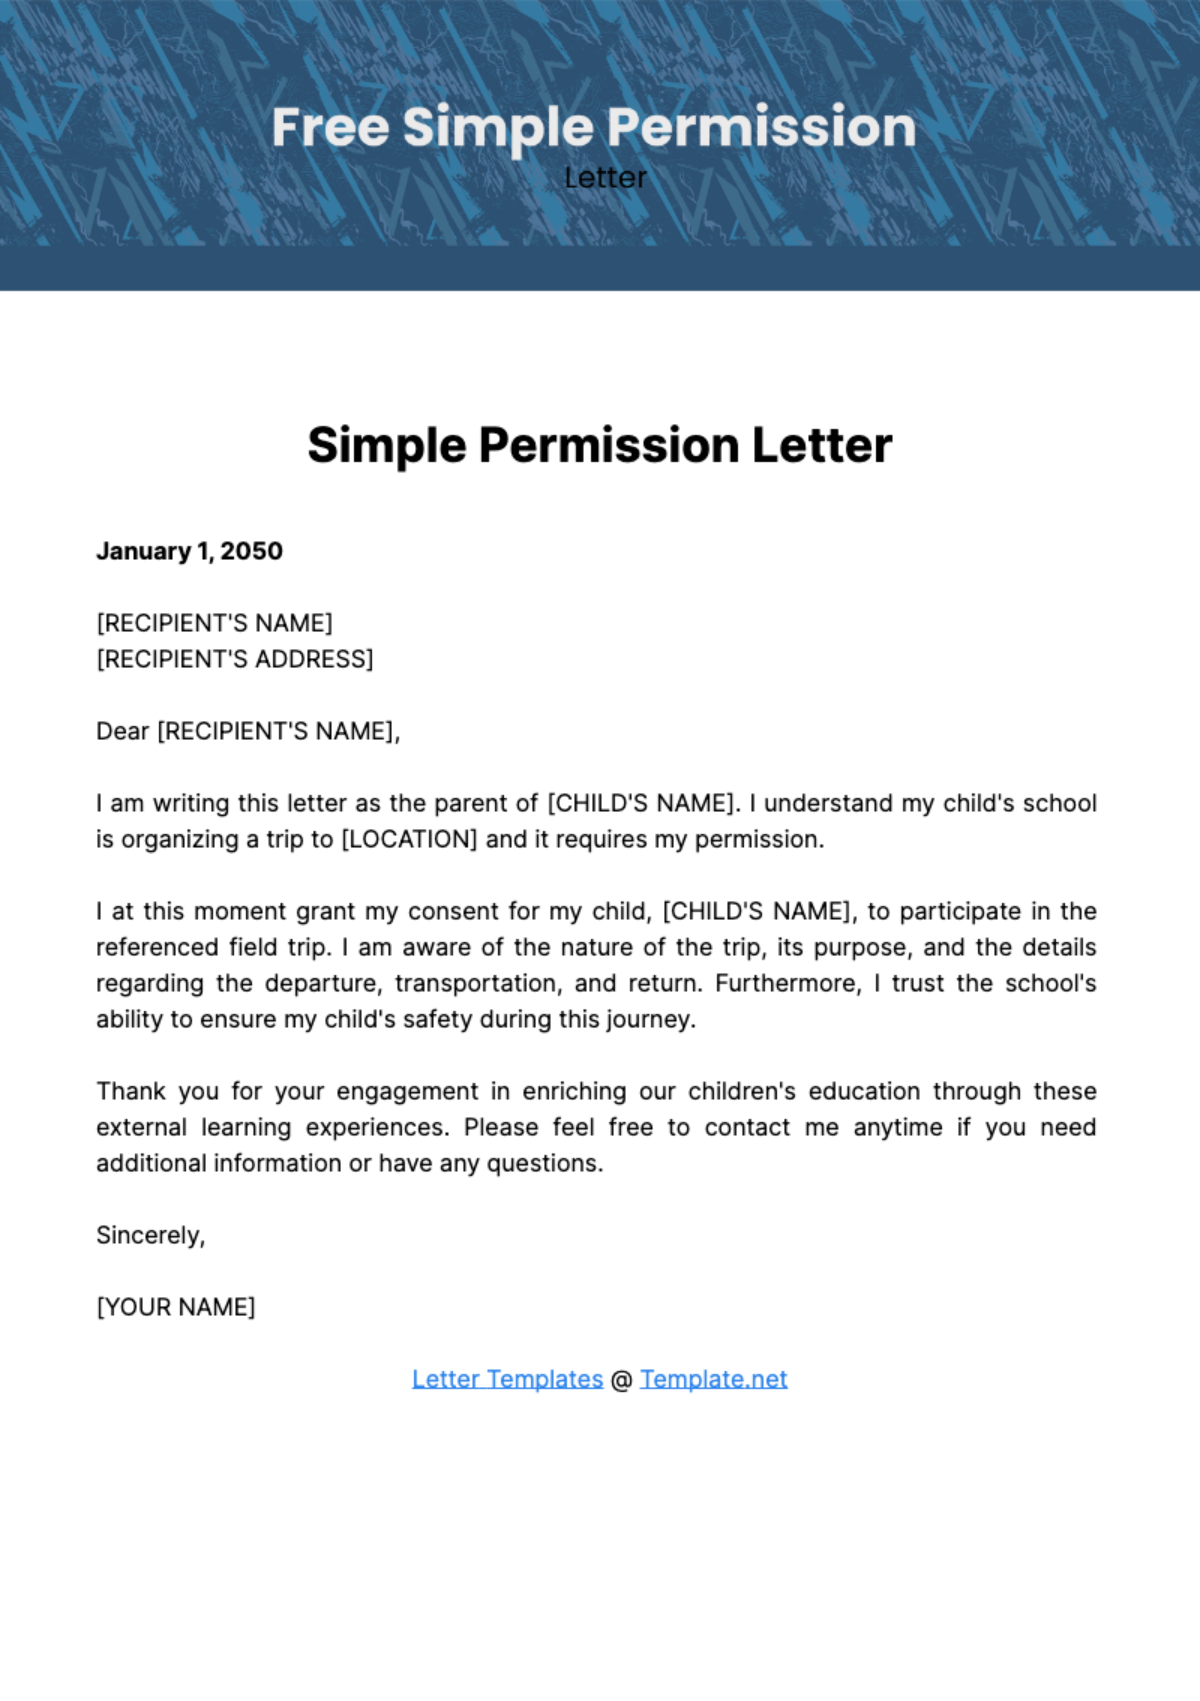 Free Simple Permission Letter Template